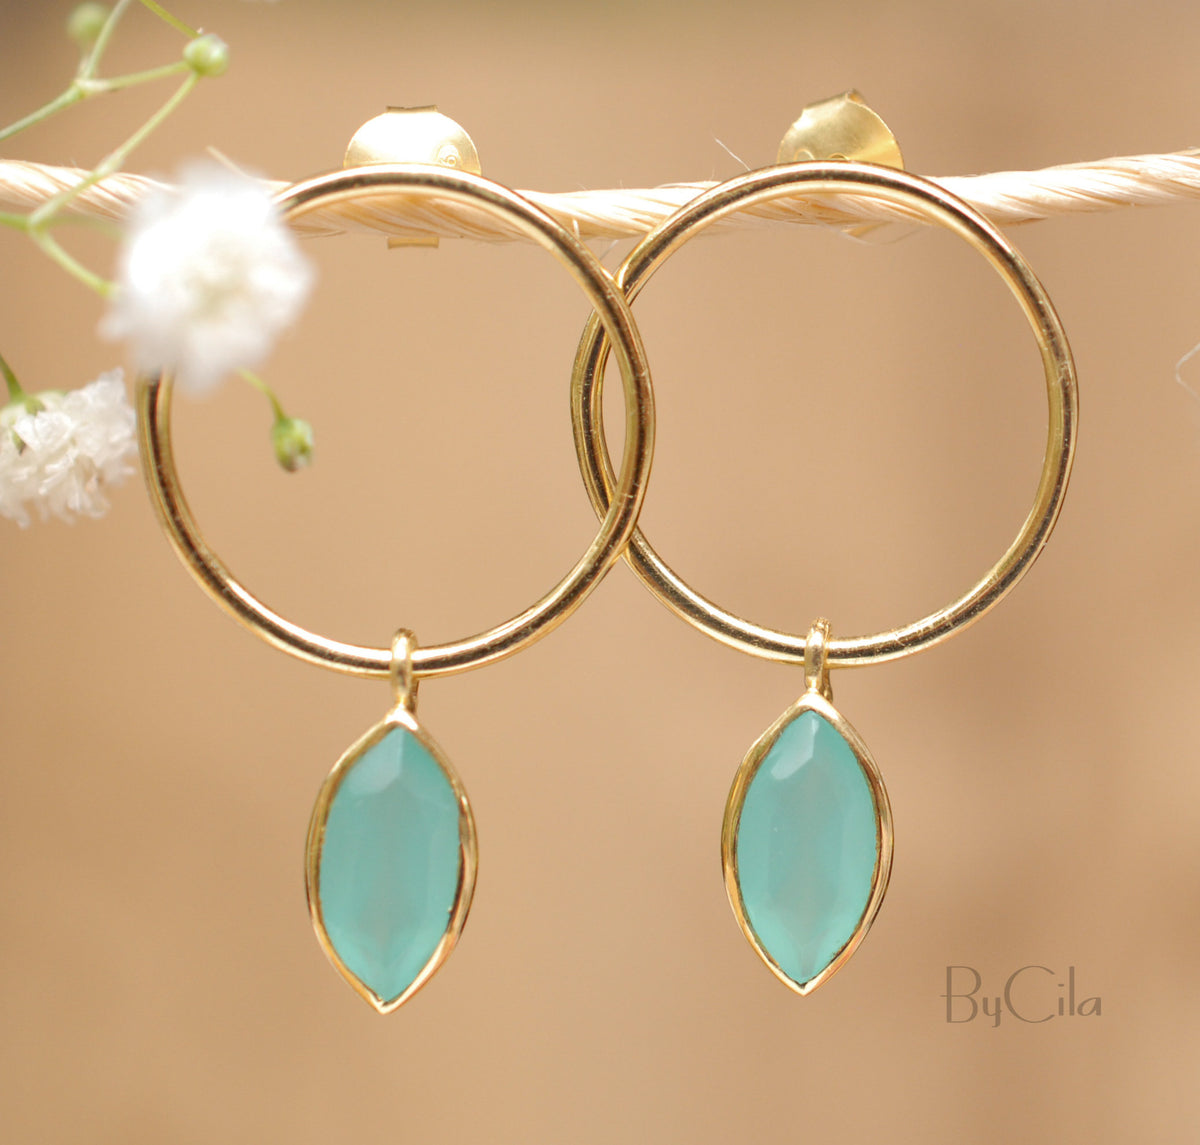 Agatha  Earrings * Aqua Chalcedony * Rose Gold Plated, Silver Plated, Gold Plated * BJE081A